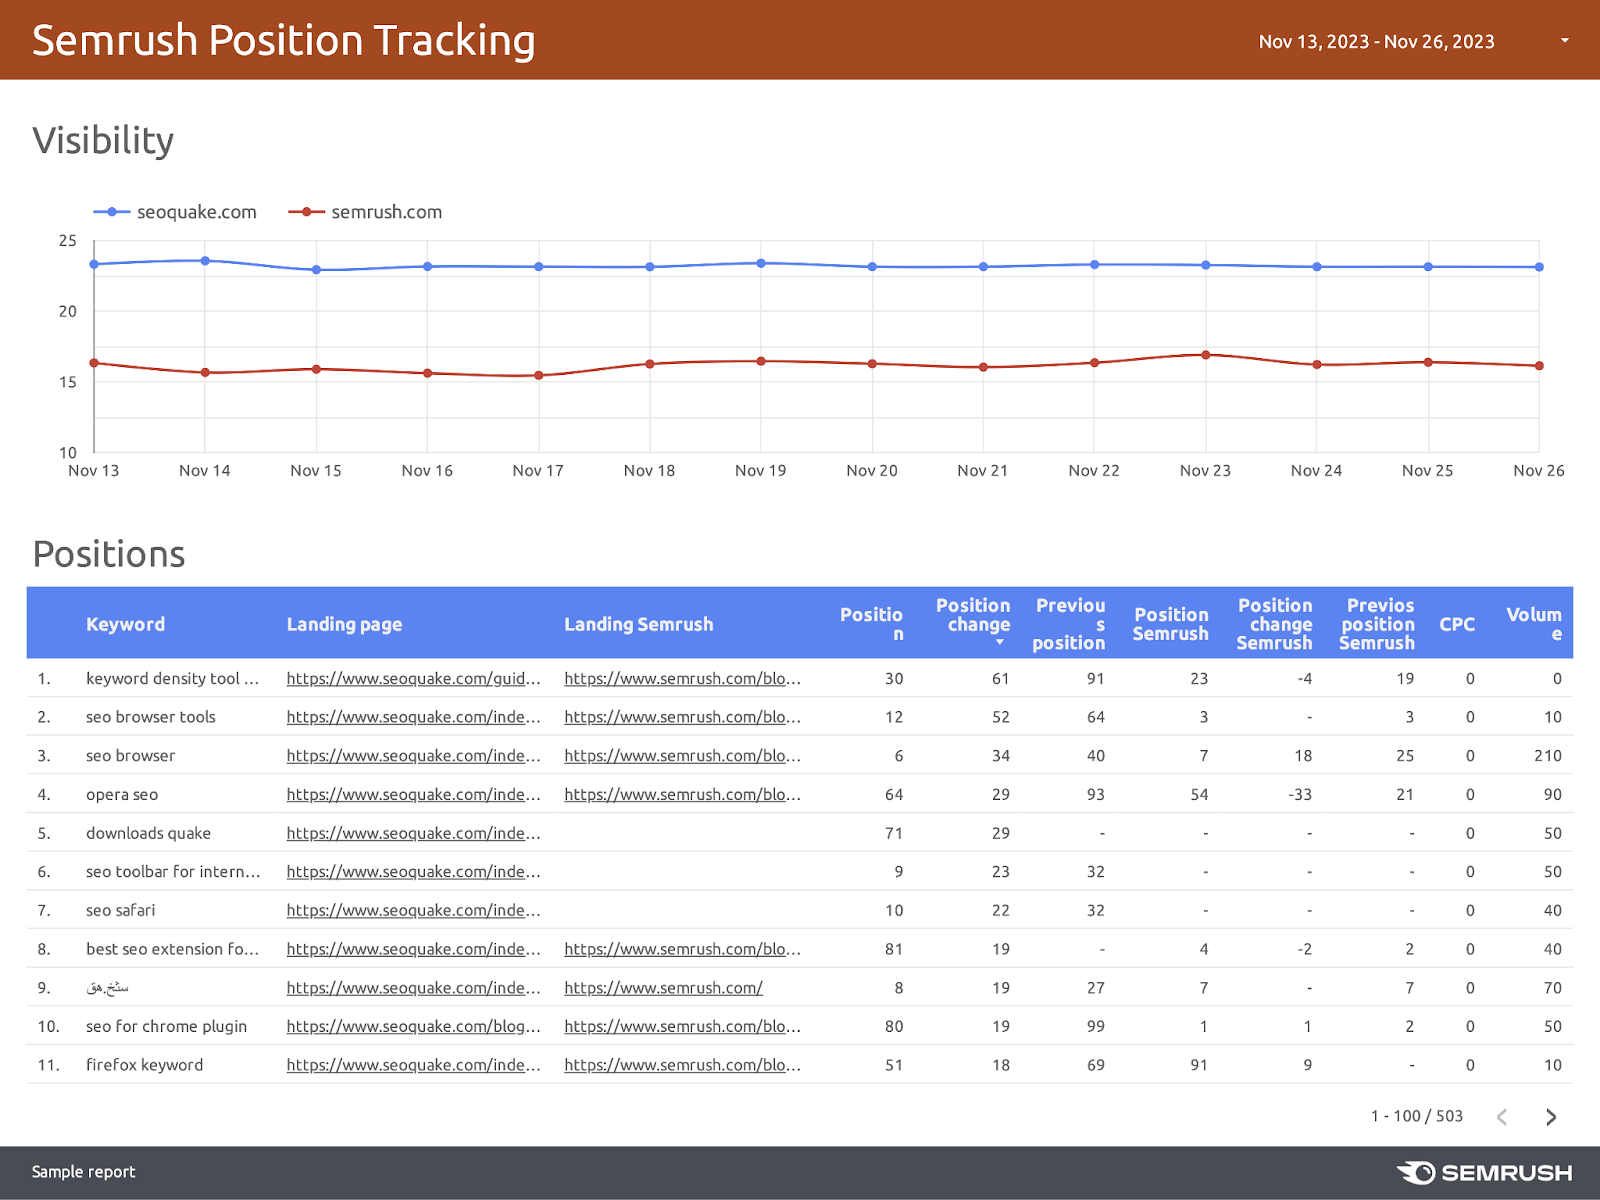 The second page of the Position Tracking report